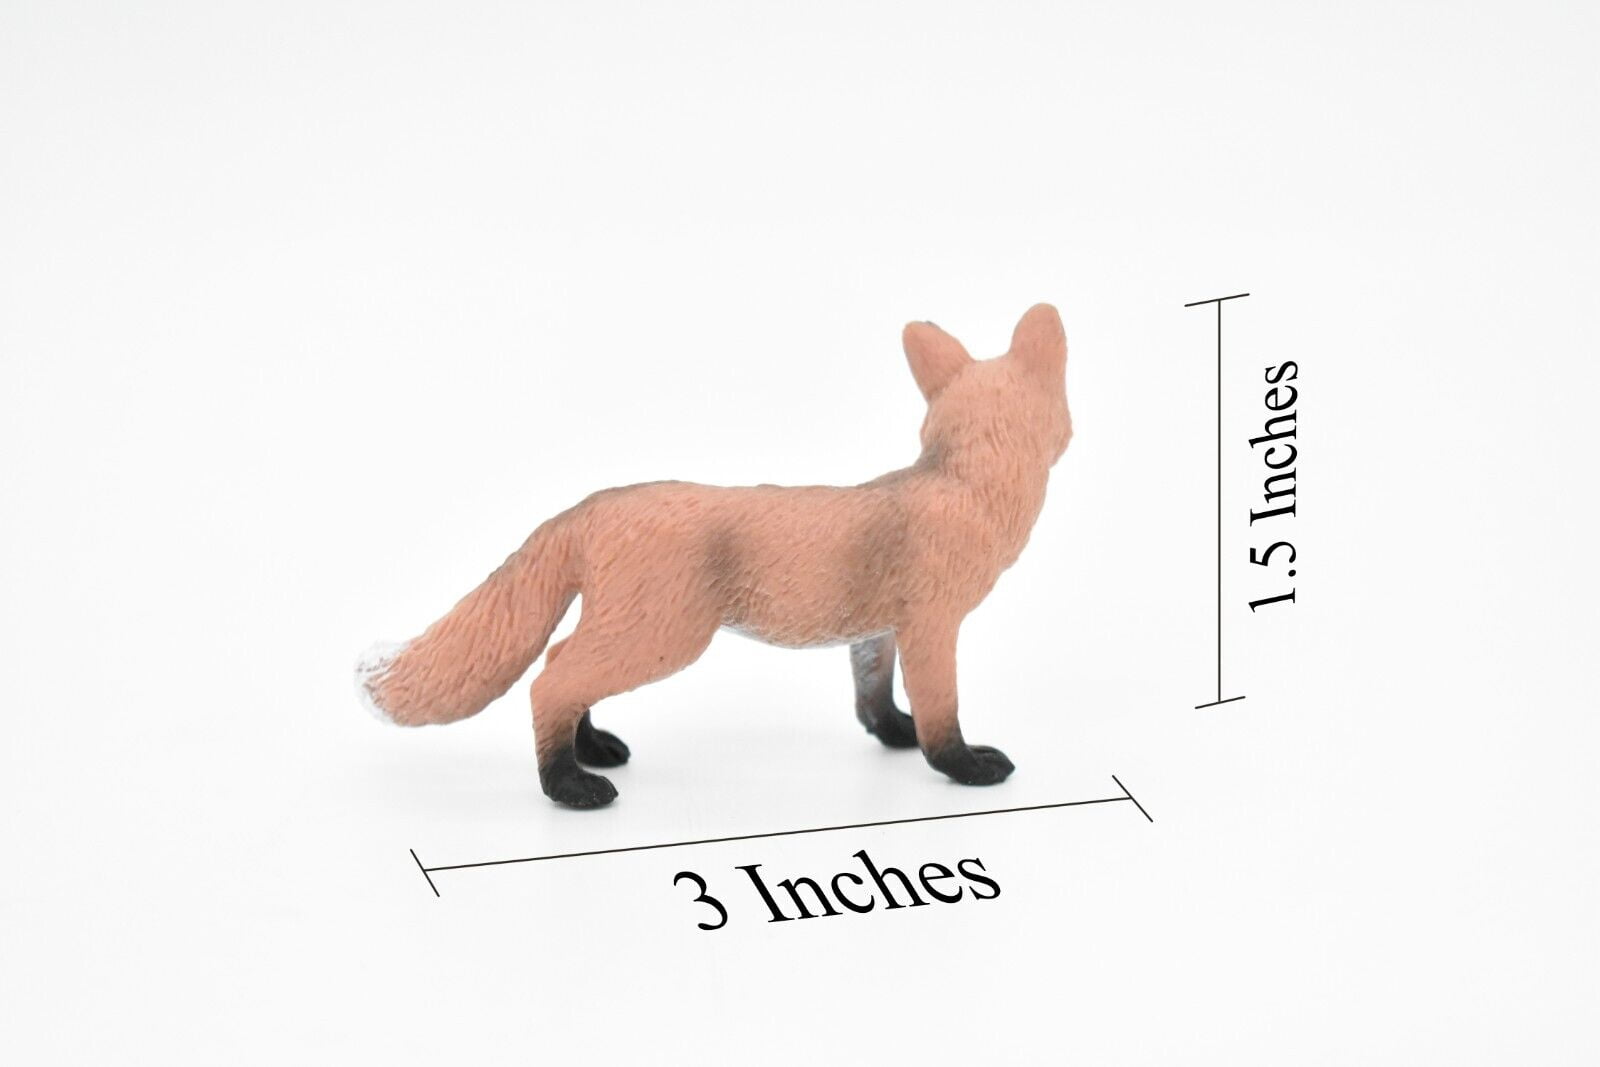 Fox Toy, Red, Animal, Very Realistic Rubber Figure, Model, Educational, Animal, Hand Painted Figurines, 3 inch Ch098 BB86